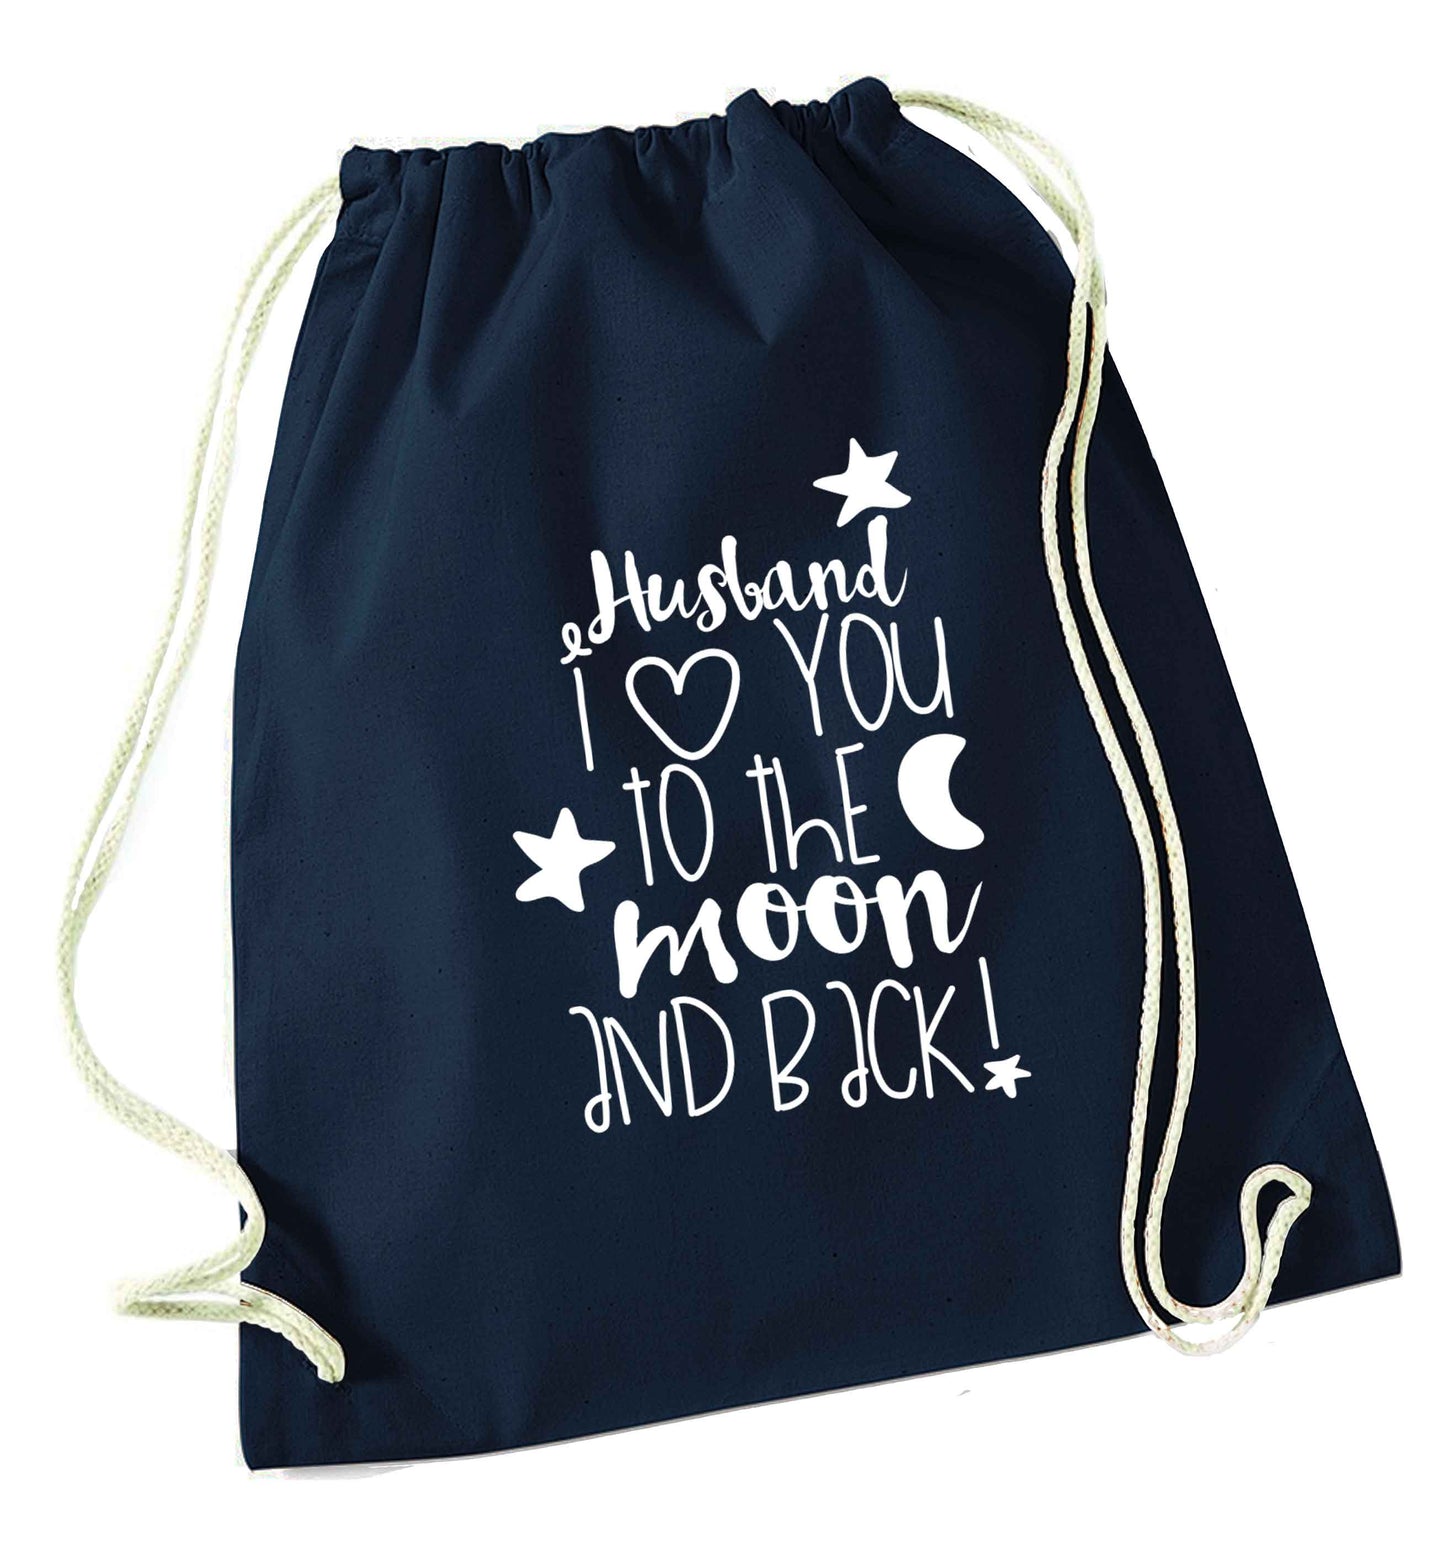 Husband I love you to the moon and back navy drawstring bag